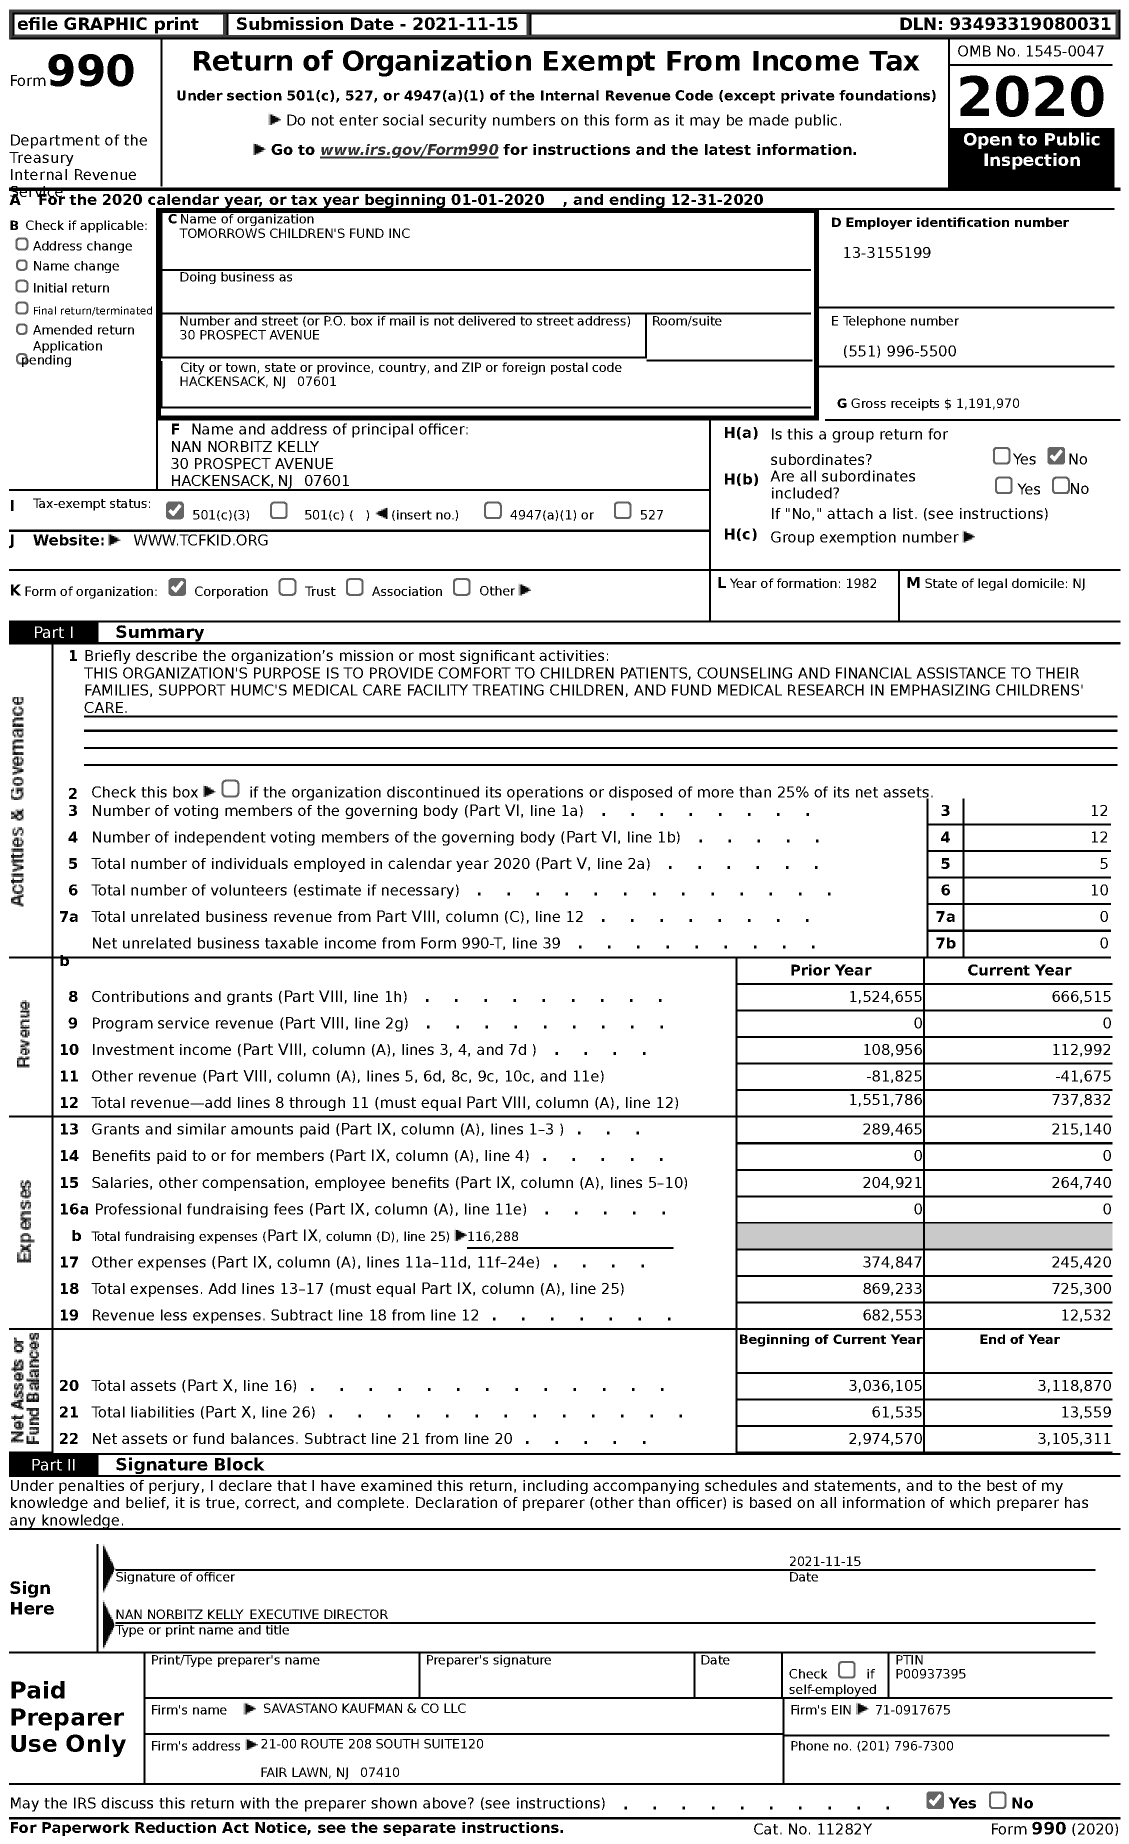 Image of first page of 2020 Form 990 for Tomorrows Children's Fund (TCF)